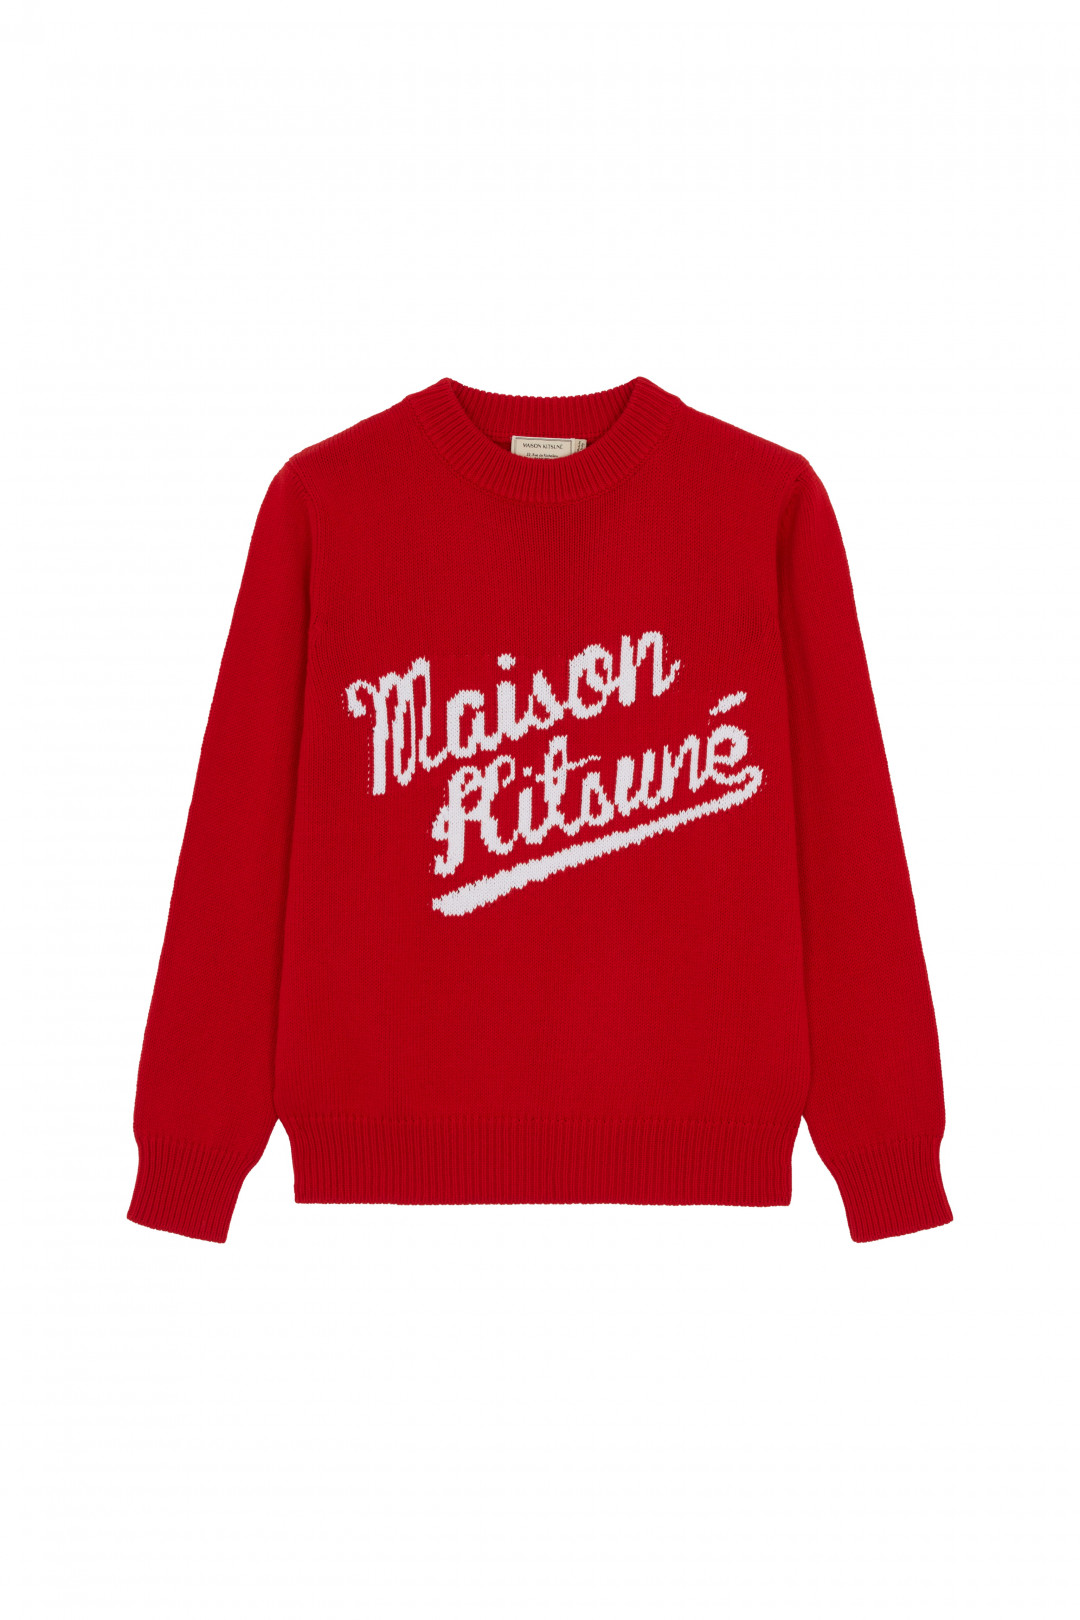 WOMENS PULLOVER IVY LEAGUE（4万円）